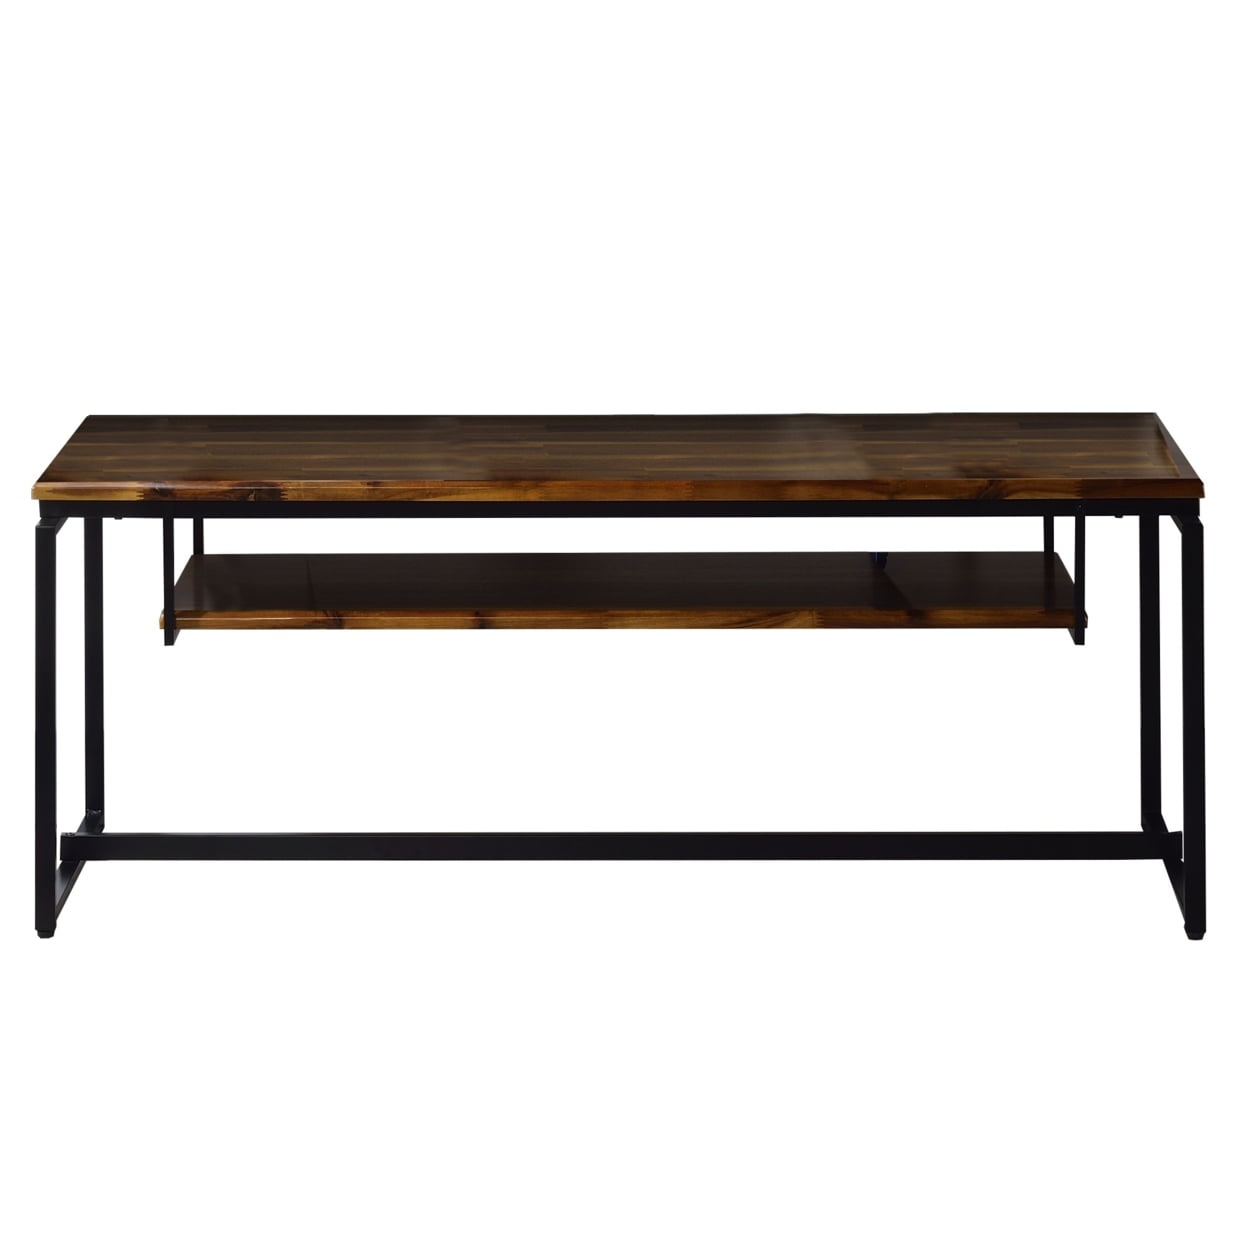 Bm209602 18 X 16 X 67 In. Metal Tv Stand Wooden Tabletop With & Open Shelf, Black & Brown